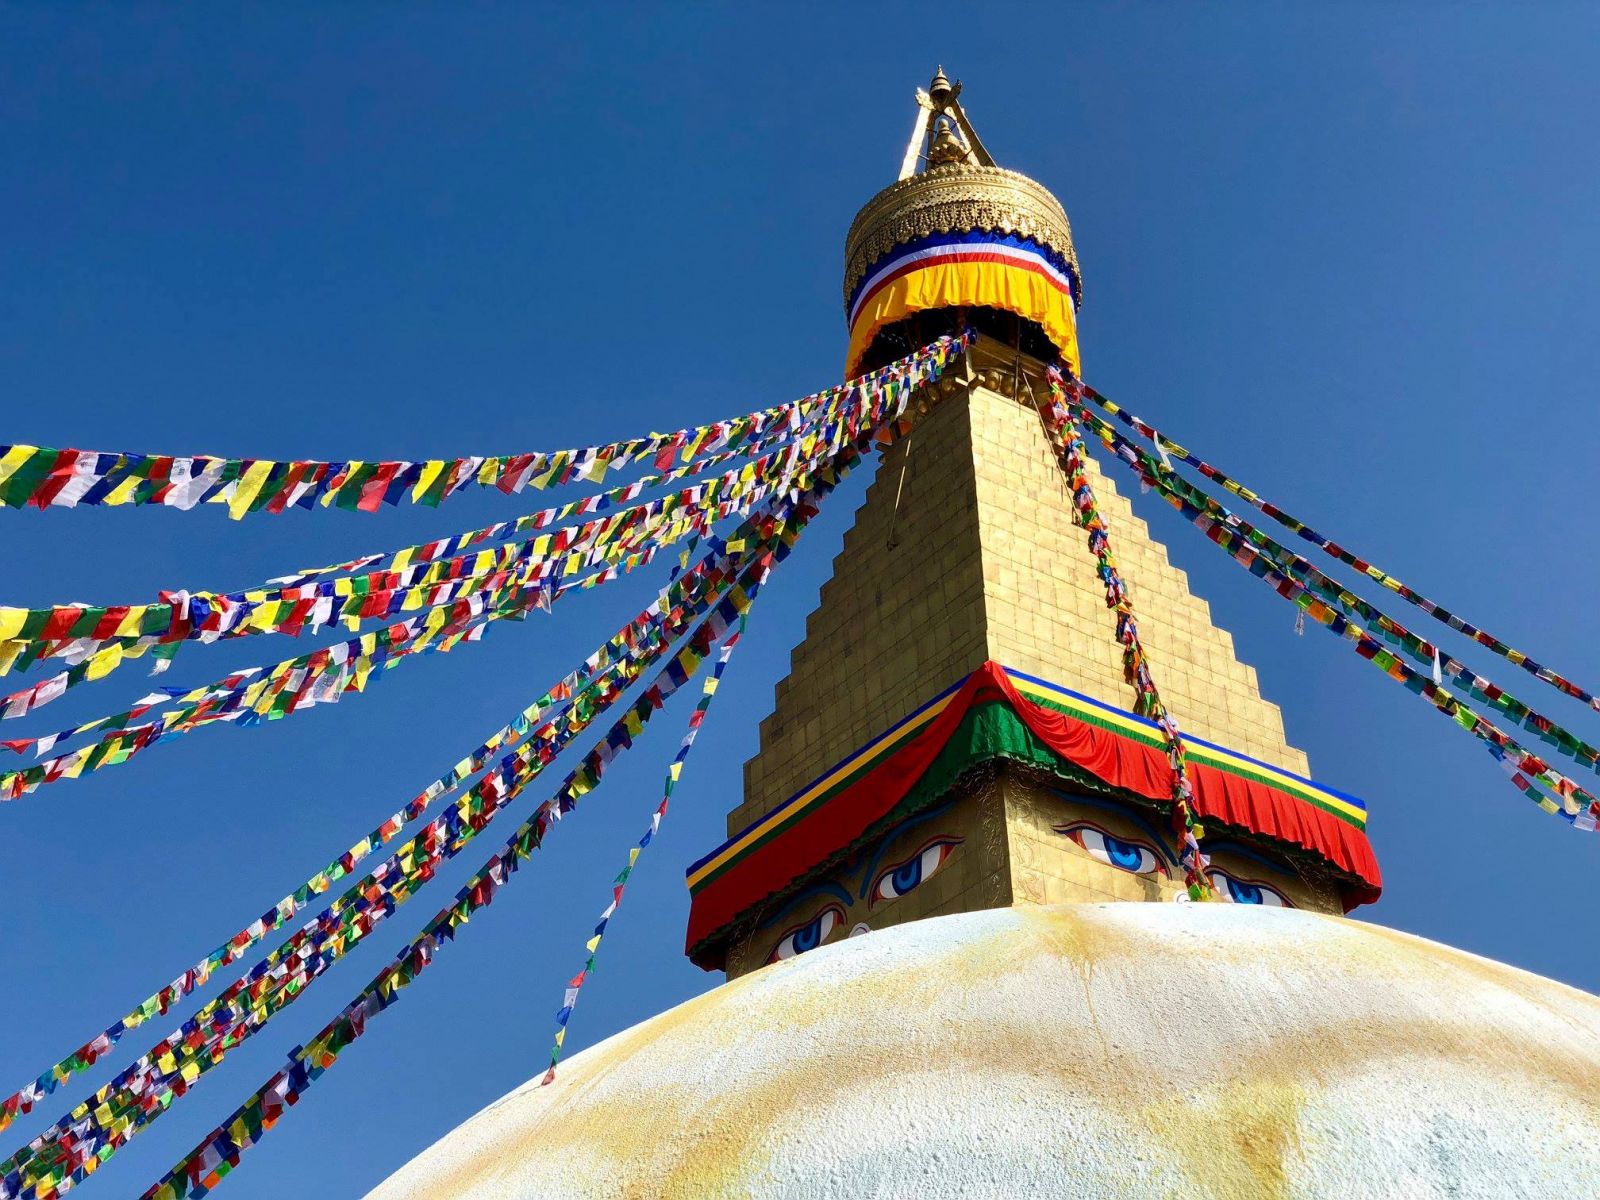 The Boudhanath Stupa, down the hill from Kopan Monastery, in Kathmandu. Each year we begin the Nepal & India pilgrimage at Kopan and also spend time at Boudha, doing practices as advised by Lama Zopa Rinpoche. Photo: Lauren Ross, Nepal & India Pilgrimage 2018.